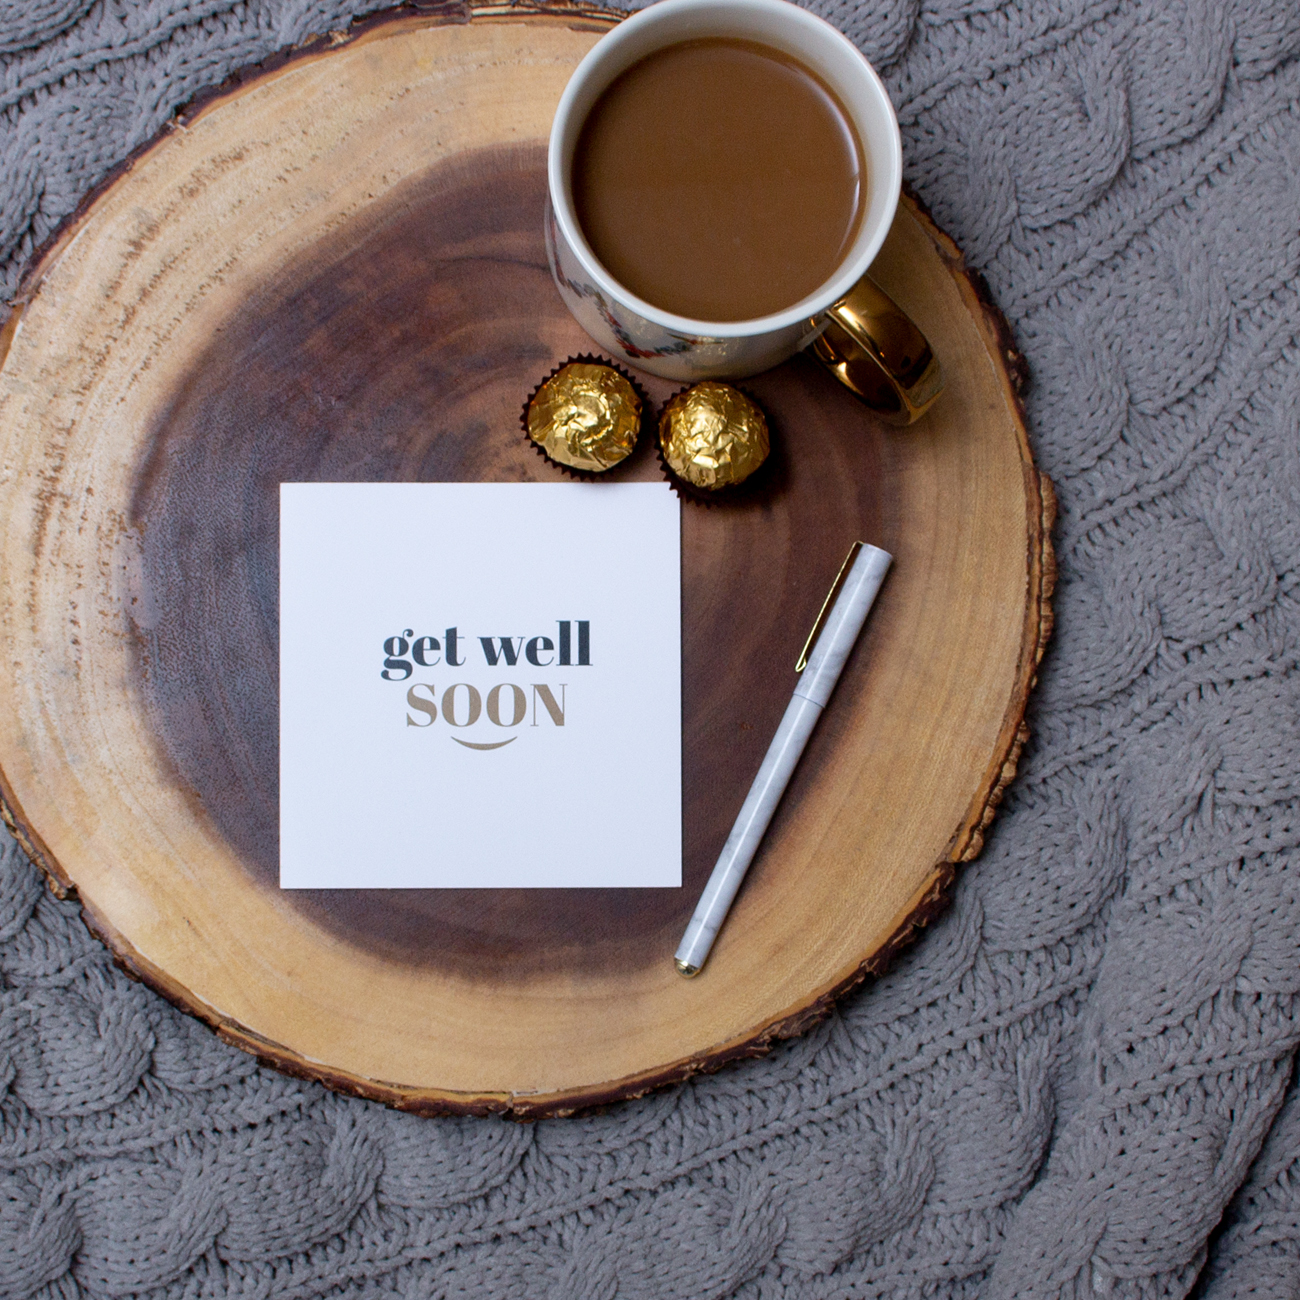 Send Get Well Wishes!